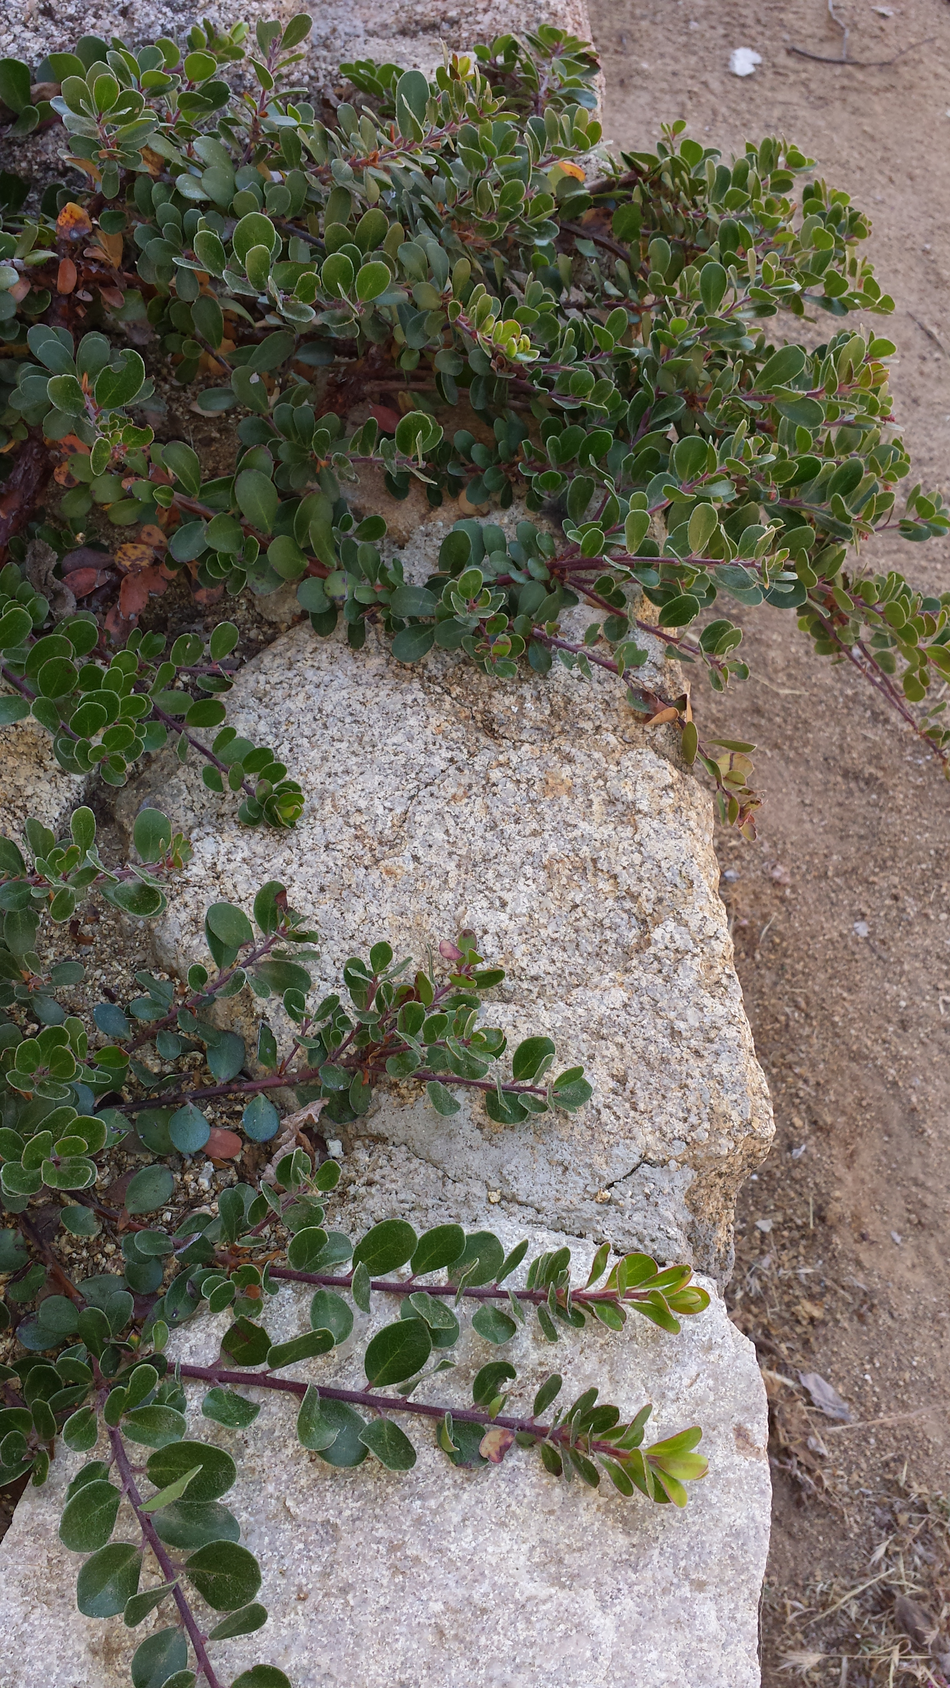 Arctostaphylos uva-ursi 'point reyes' growing on top of a rockwall.